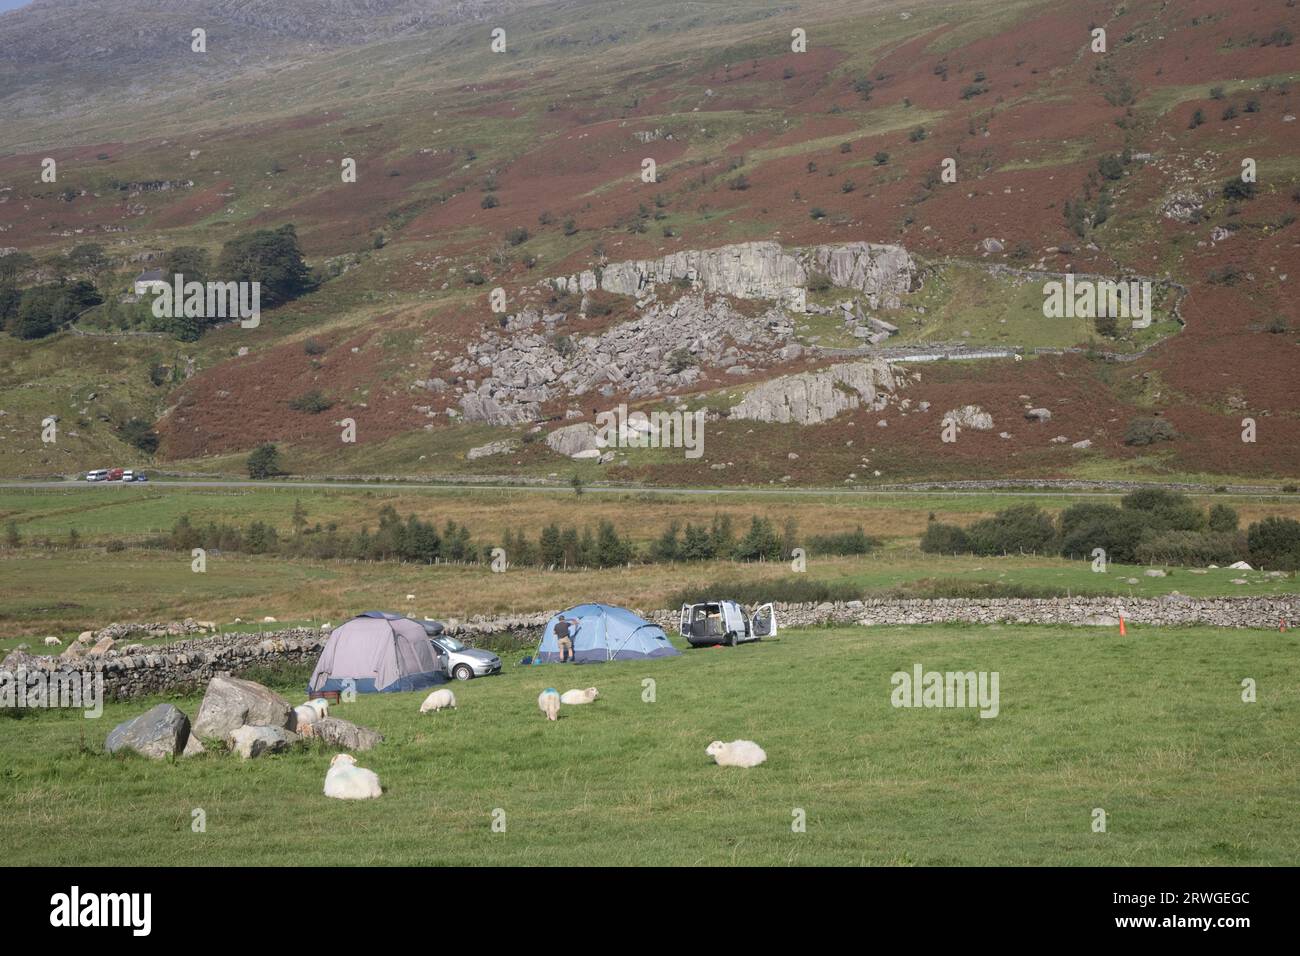 Campers in field with sheep grazing dry stone walls and rock fall in background in rugged North Wales scenery near Garth Farm Campsite in Capel Curig Stock Photo